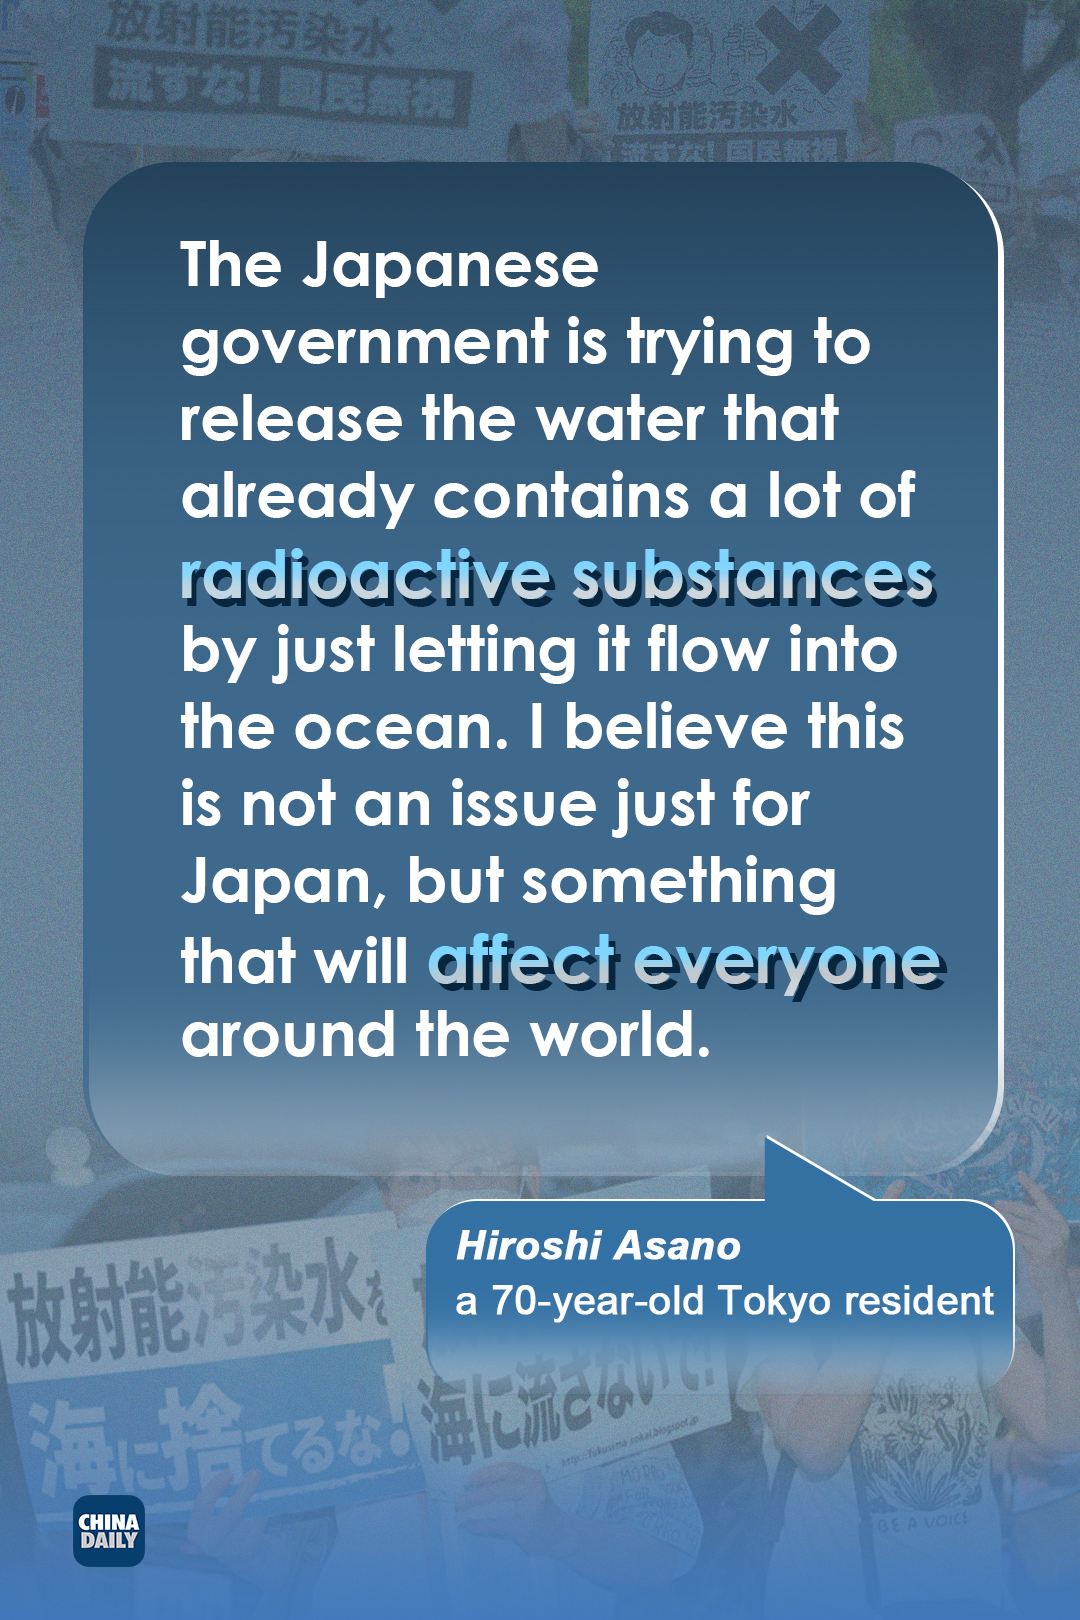 Outcry grows as Japan unveils wastewater discharge plan